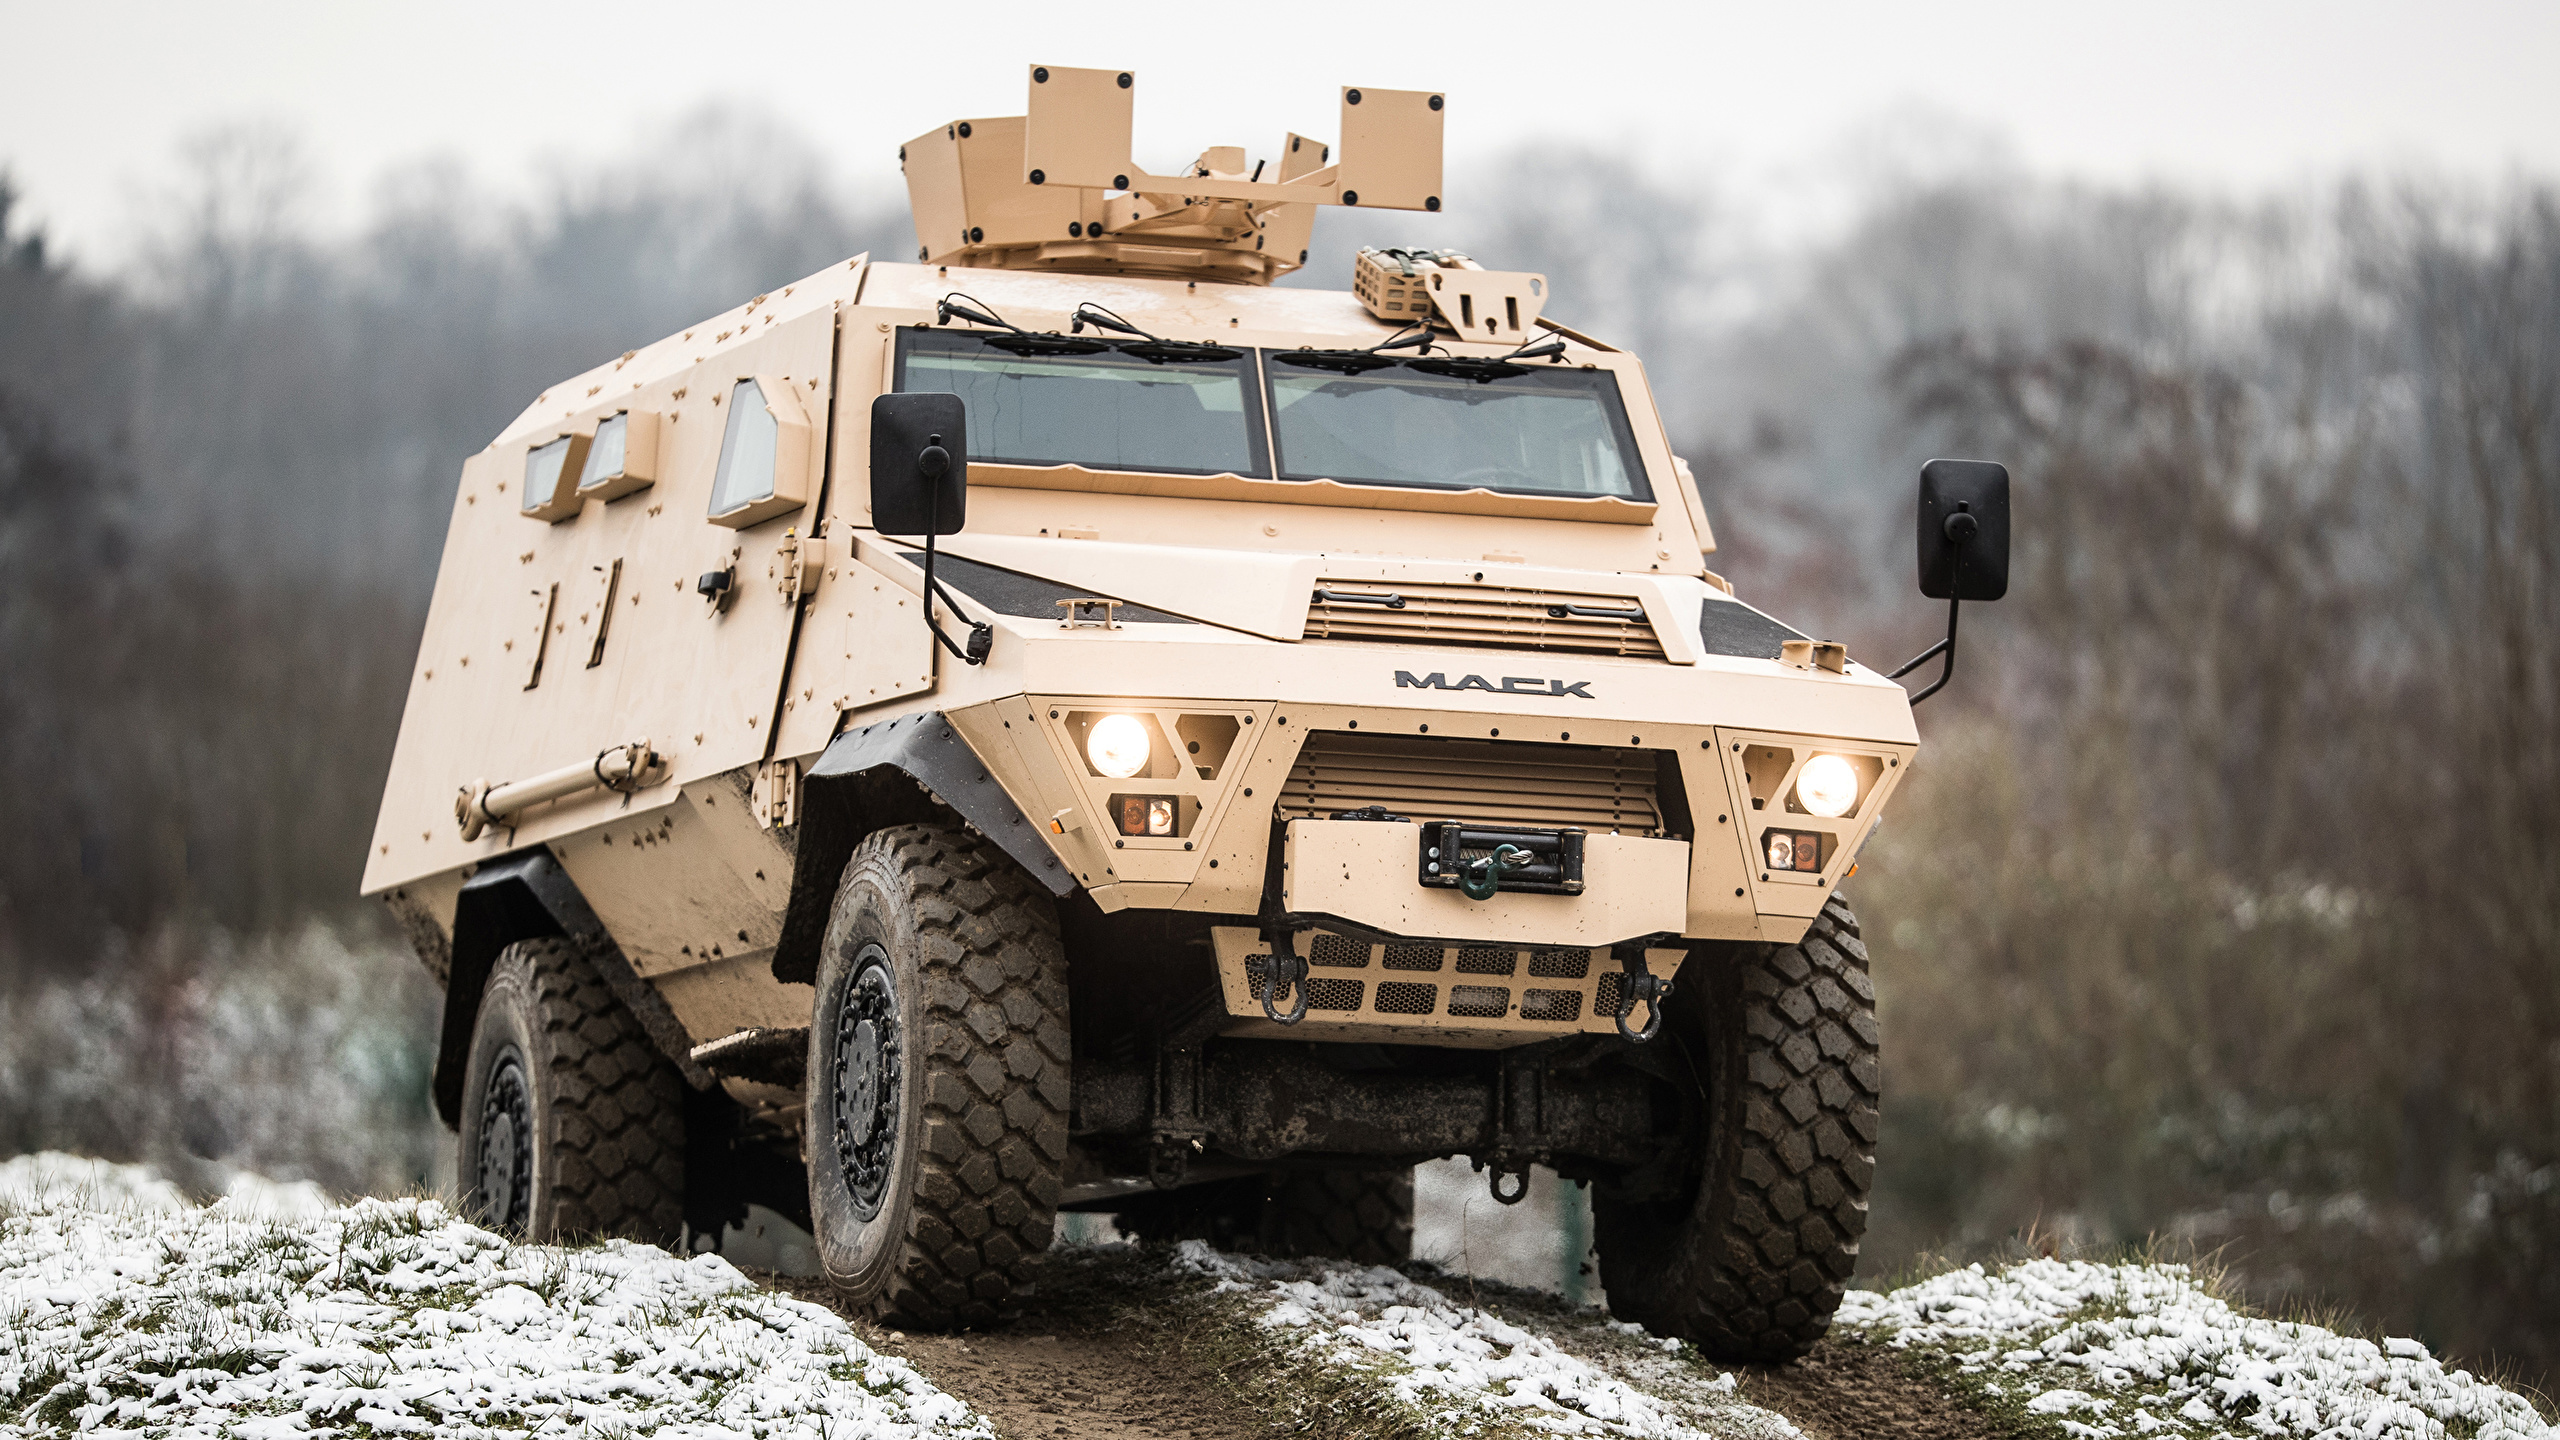 France will transfer 20 modern ACMAT Bastion wheeled armored personnel carriers to Ukraine